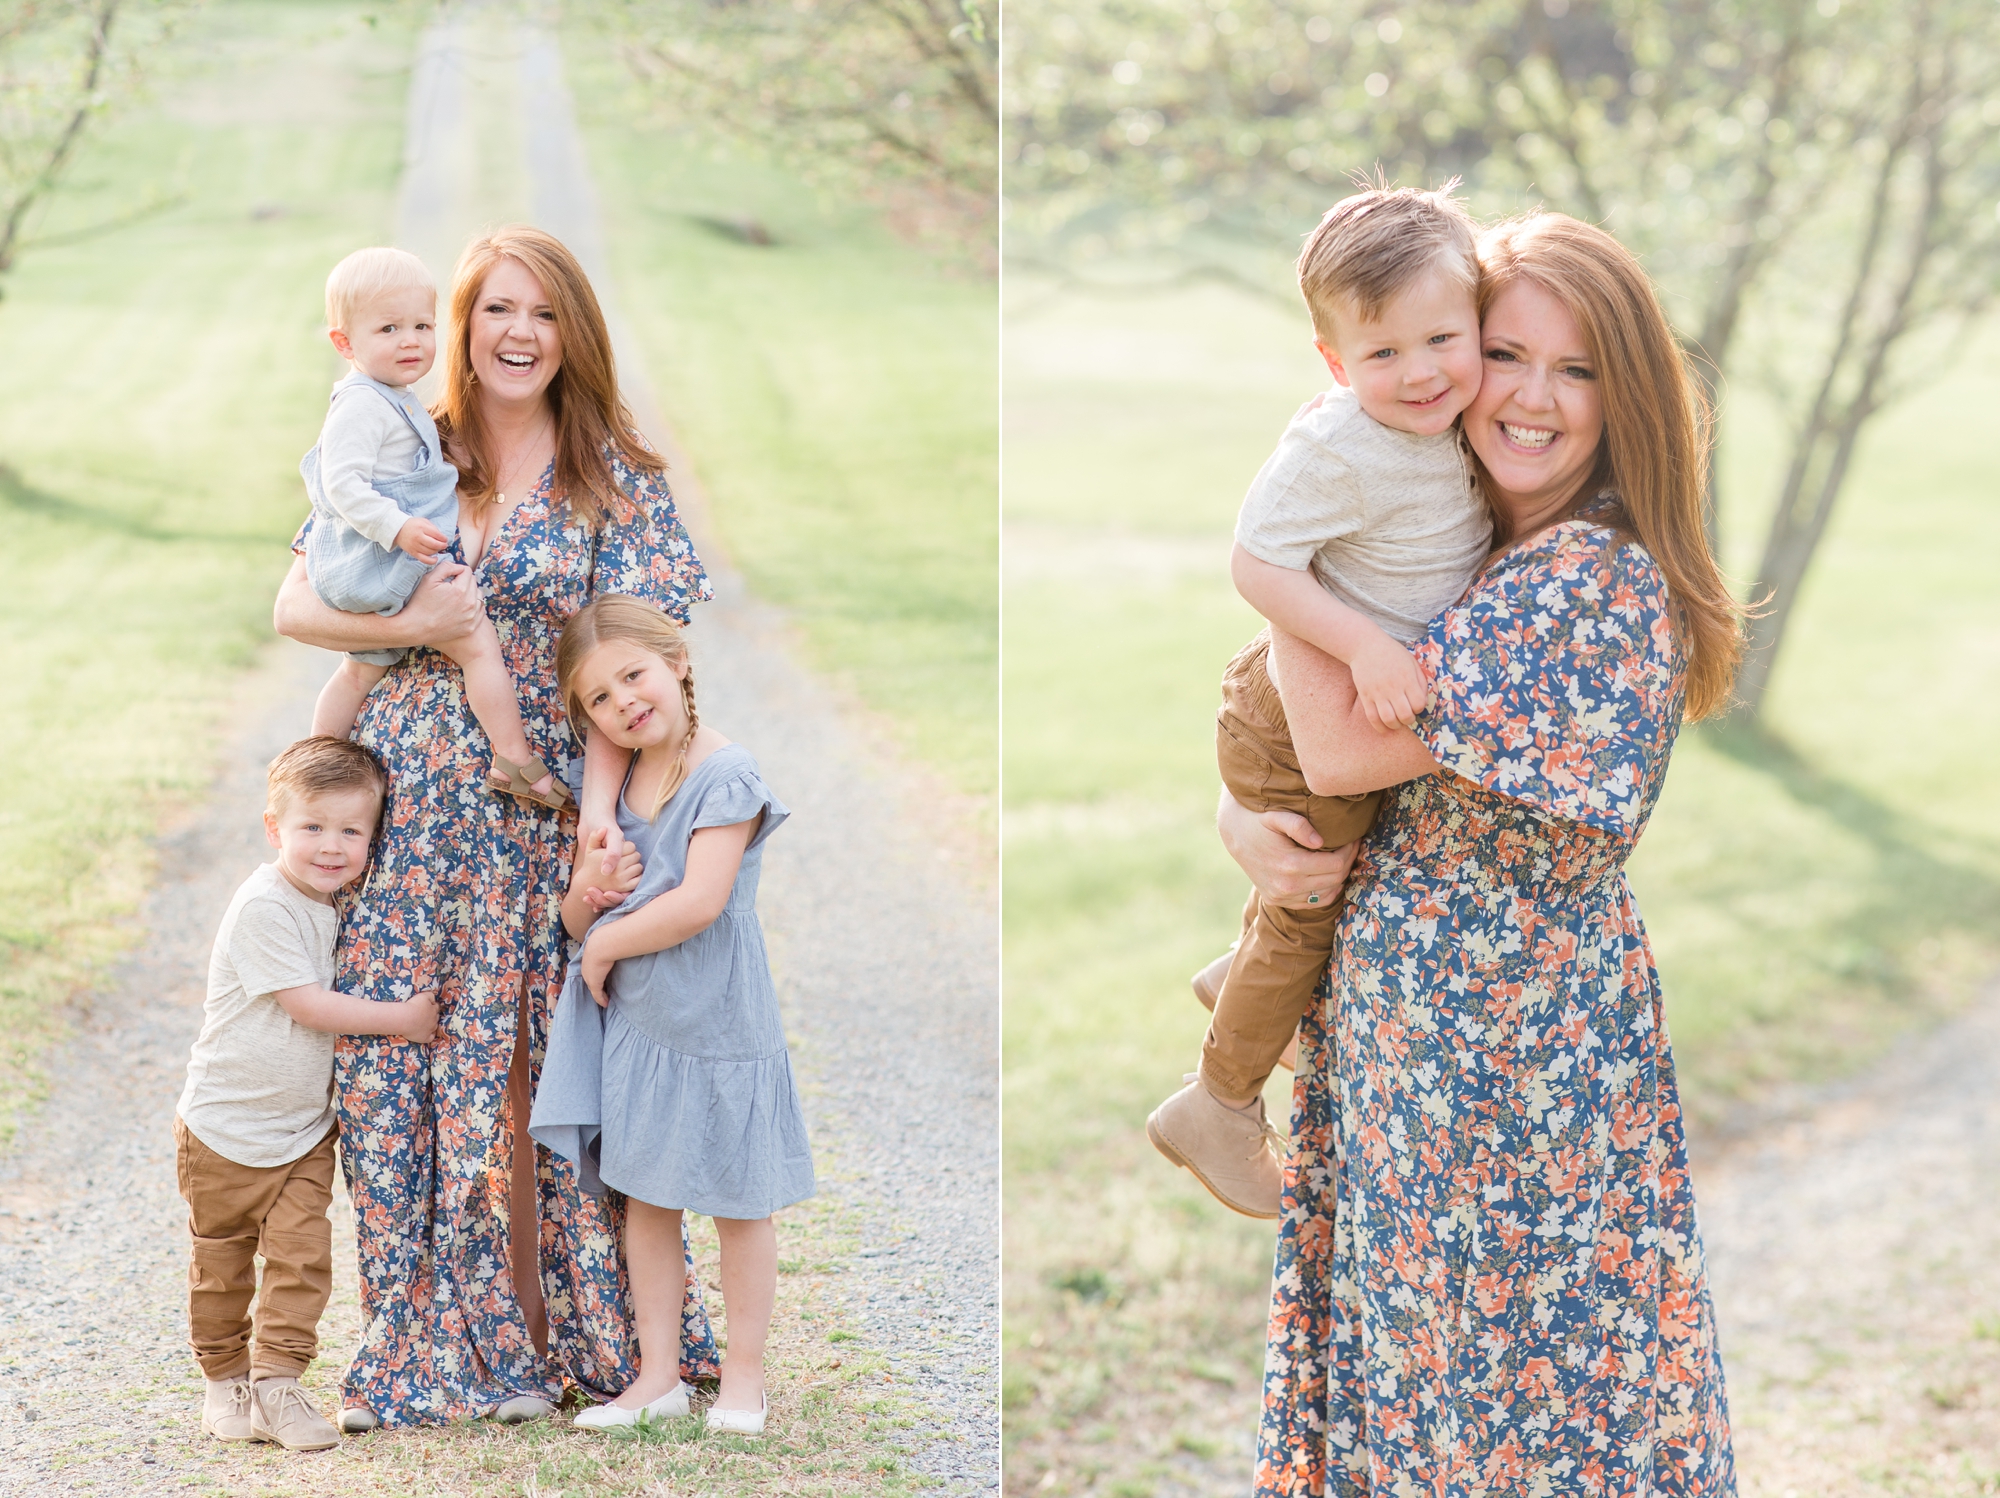 Katelyn James poses on gravel road with kids during family portrait session with family photographer and educator Rebecca Rice of Rebecca Rice Photography. This session was so much fun and it was an honor to capture Katelyn James and her sweet family. Click to see more from this session love on the blog now! 